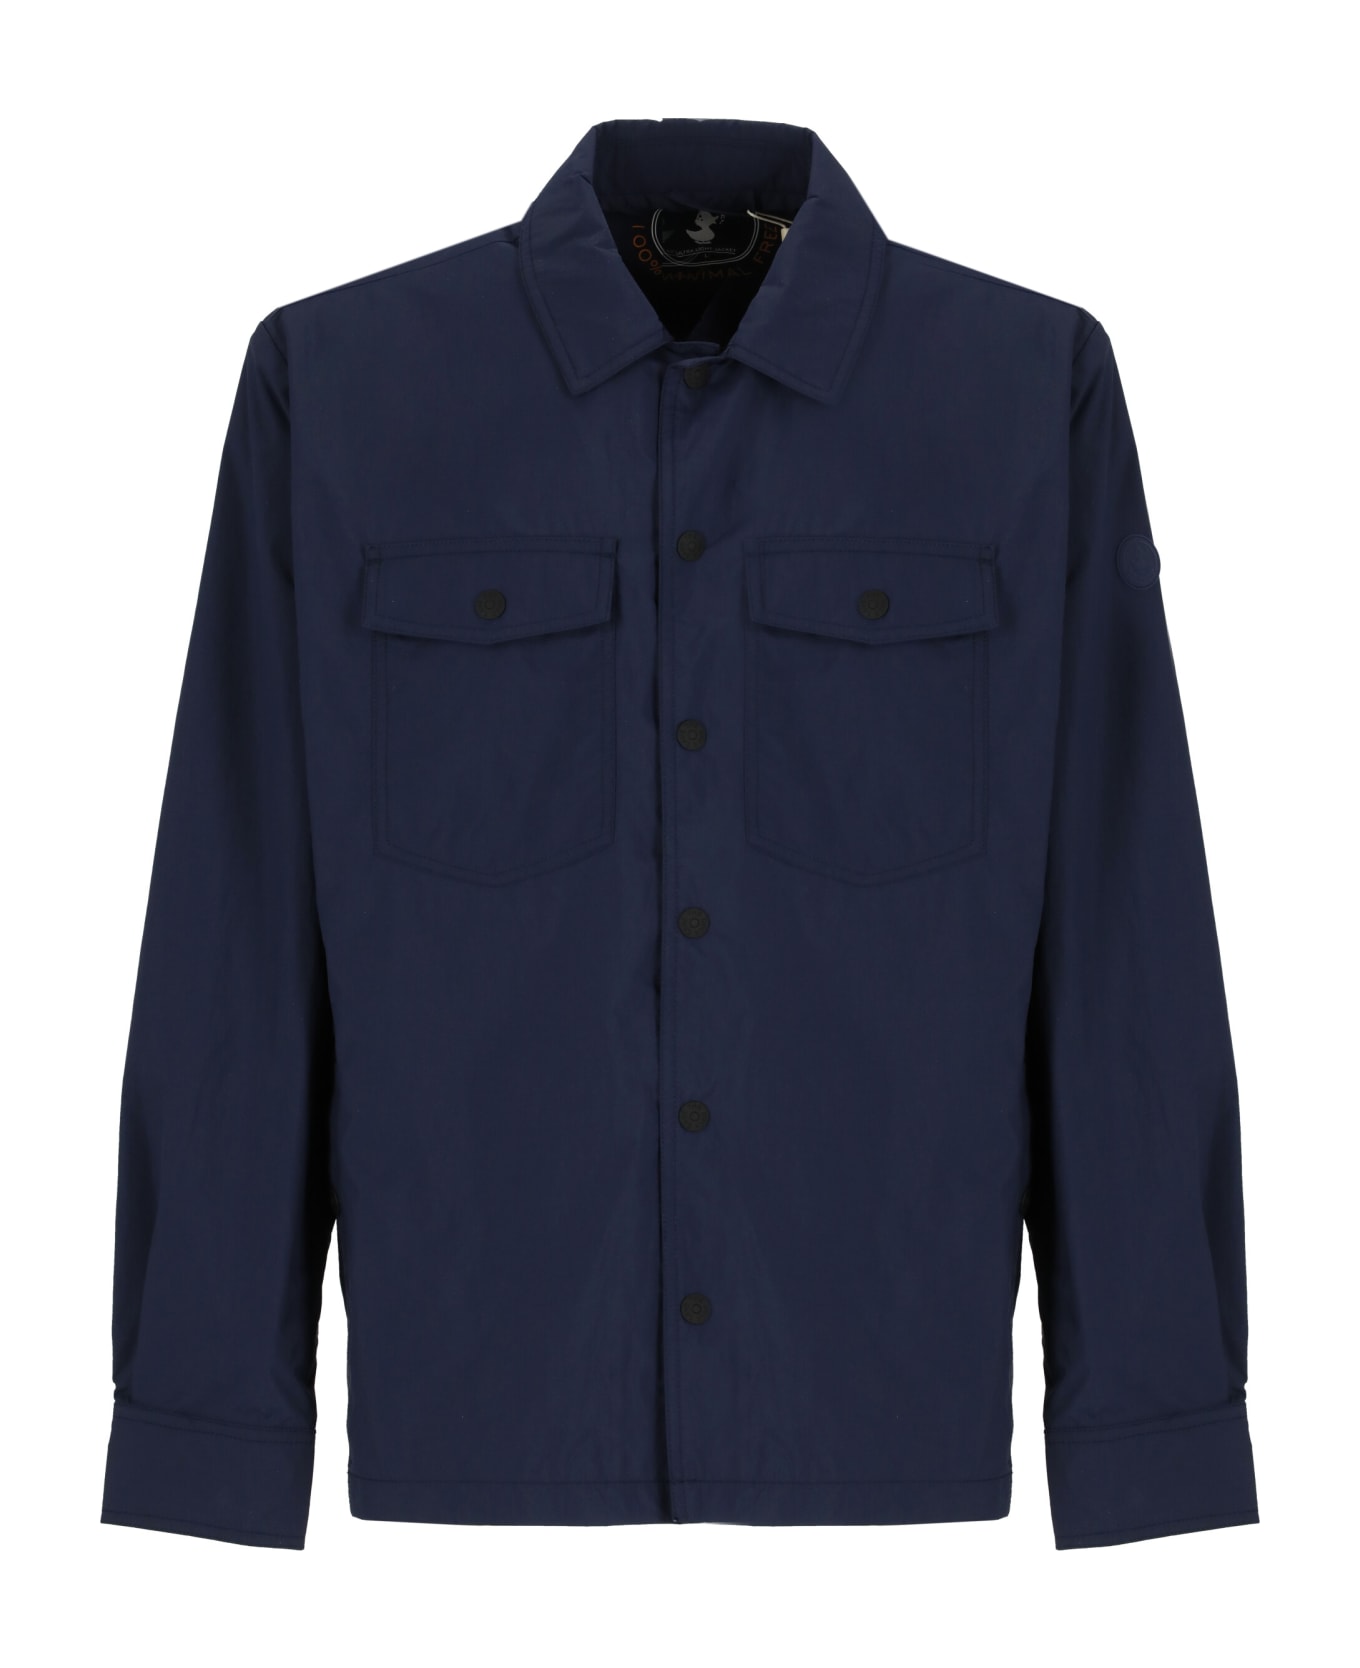 Save the Duck Kendri Jacket - Blue